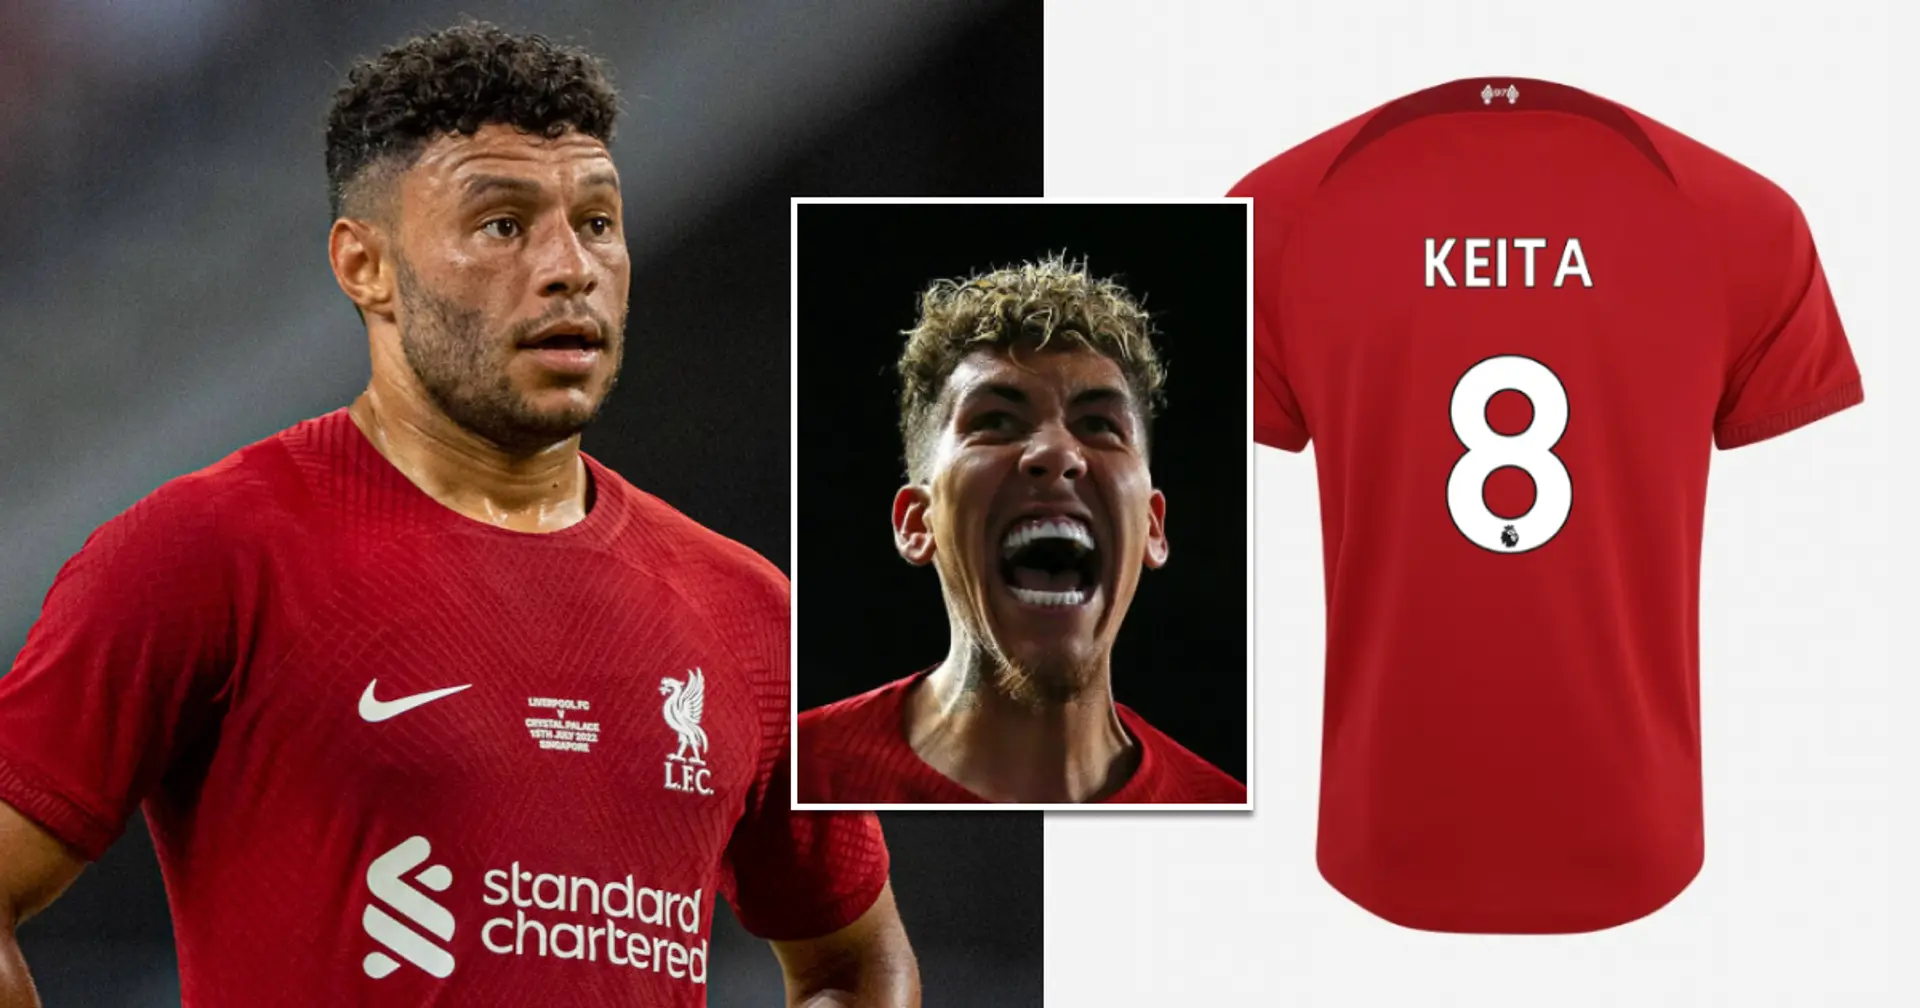 5 shirt numbers may soon become available at Liverpool by next season